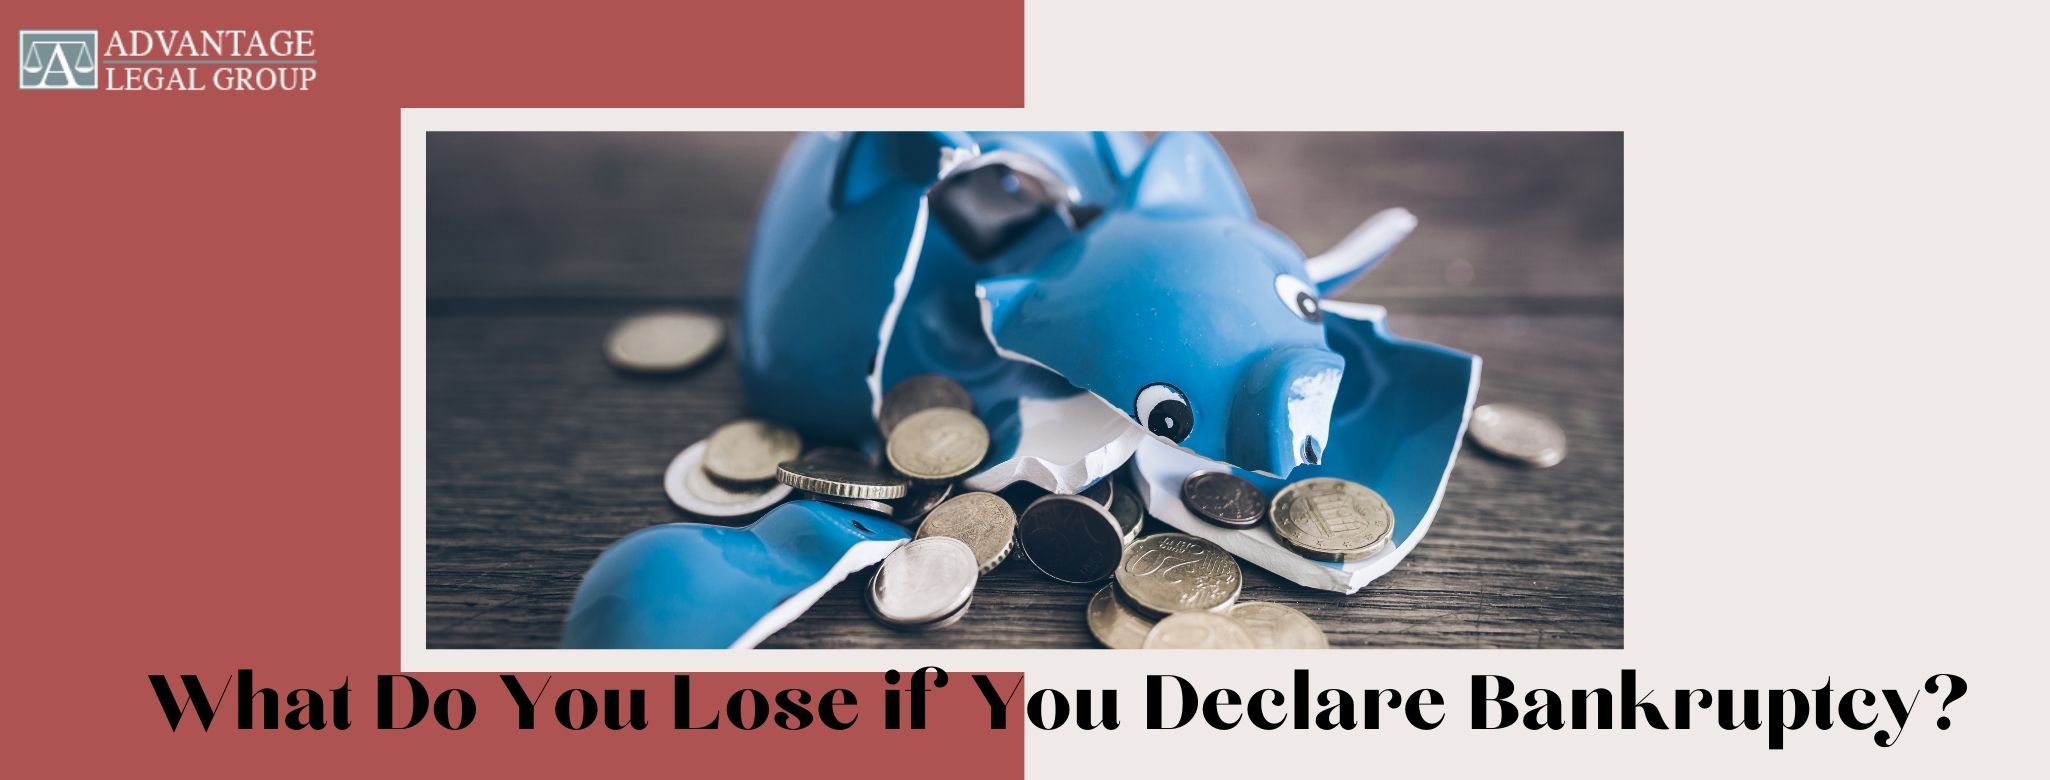 What Do You Lose if You Declare Bankruptcy?